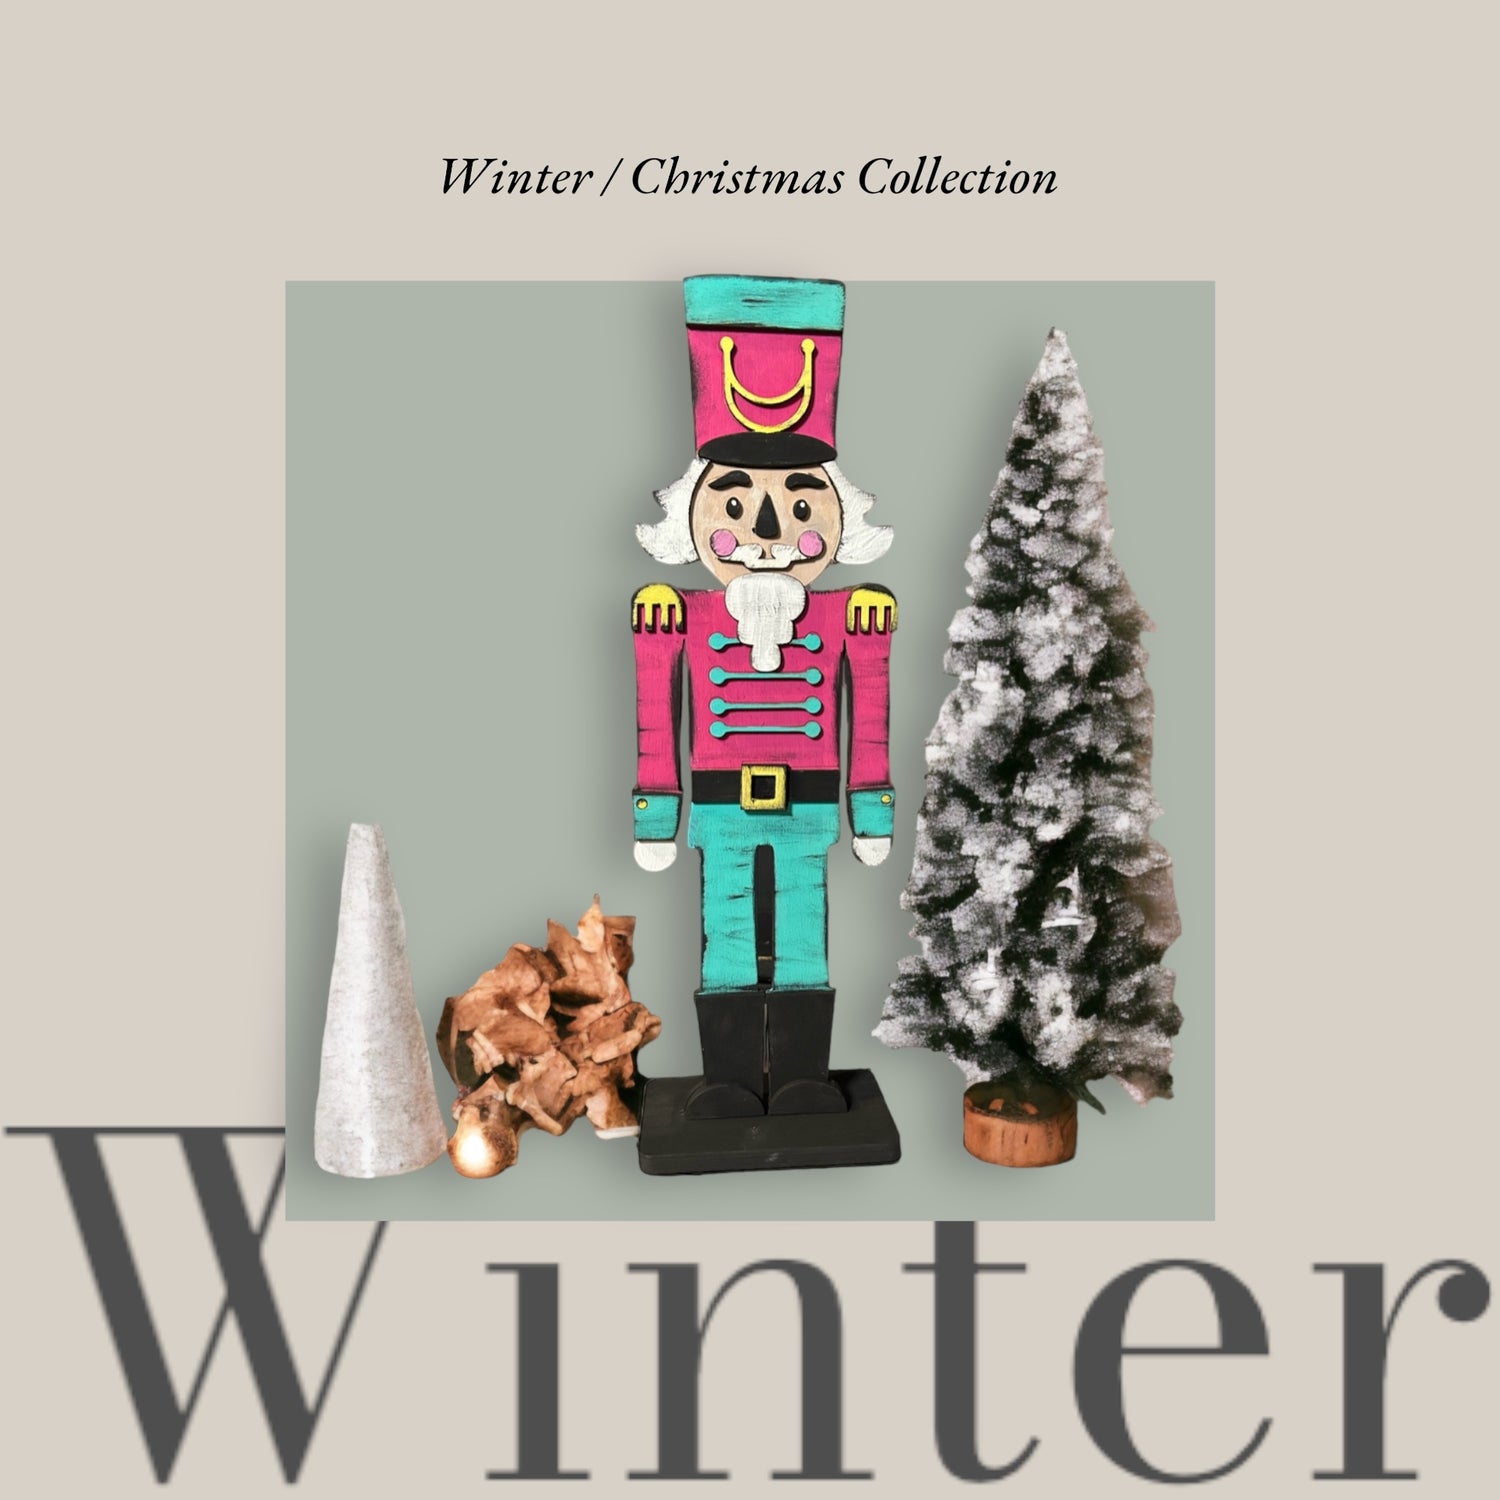 Winter / Christmas Collection